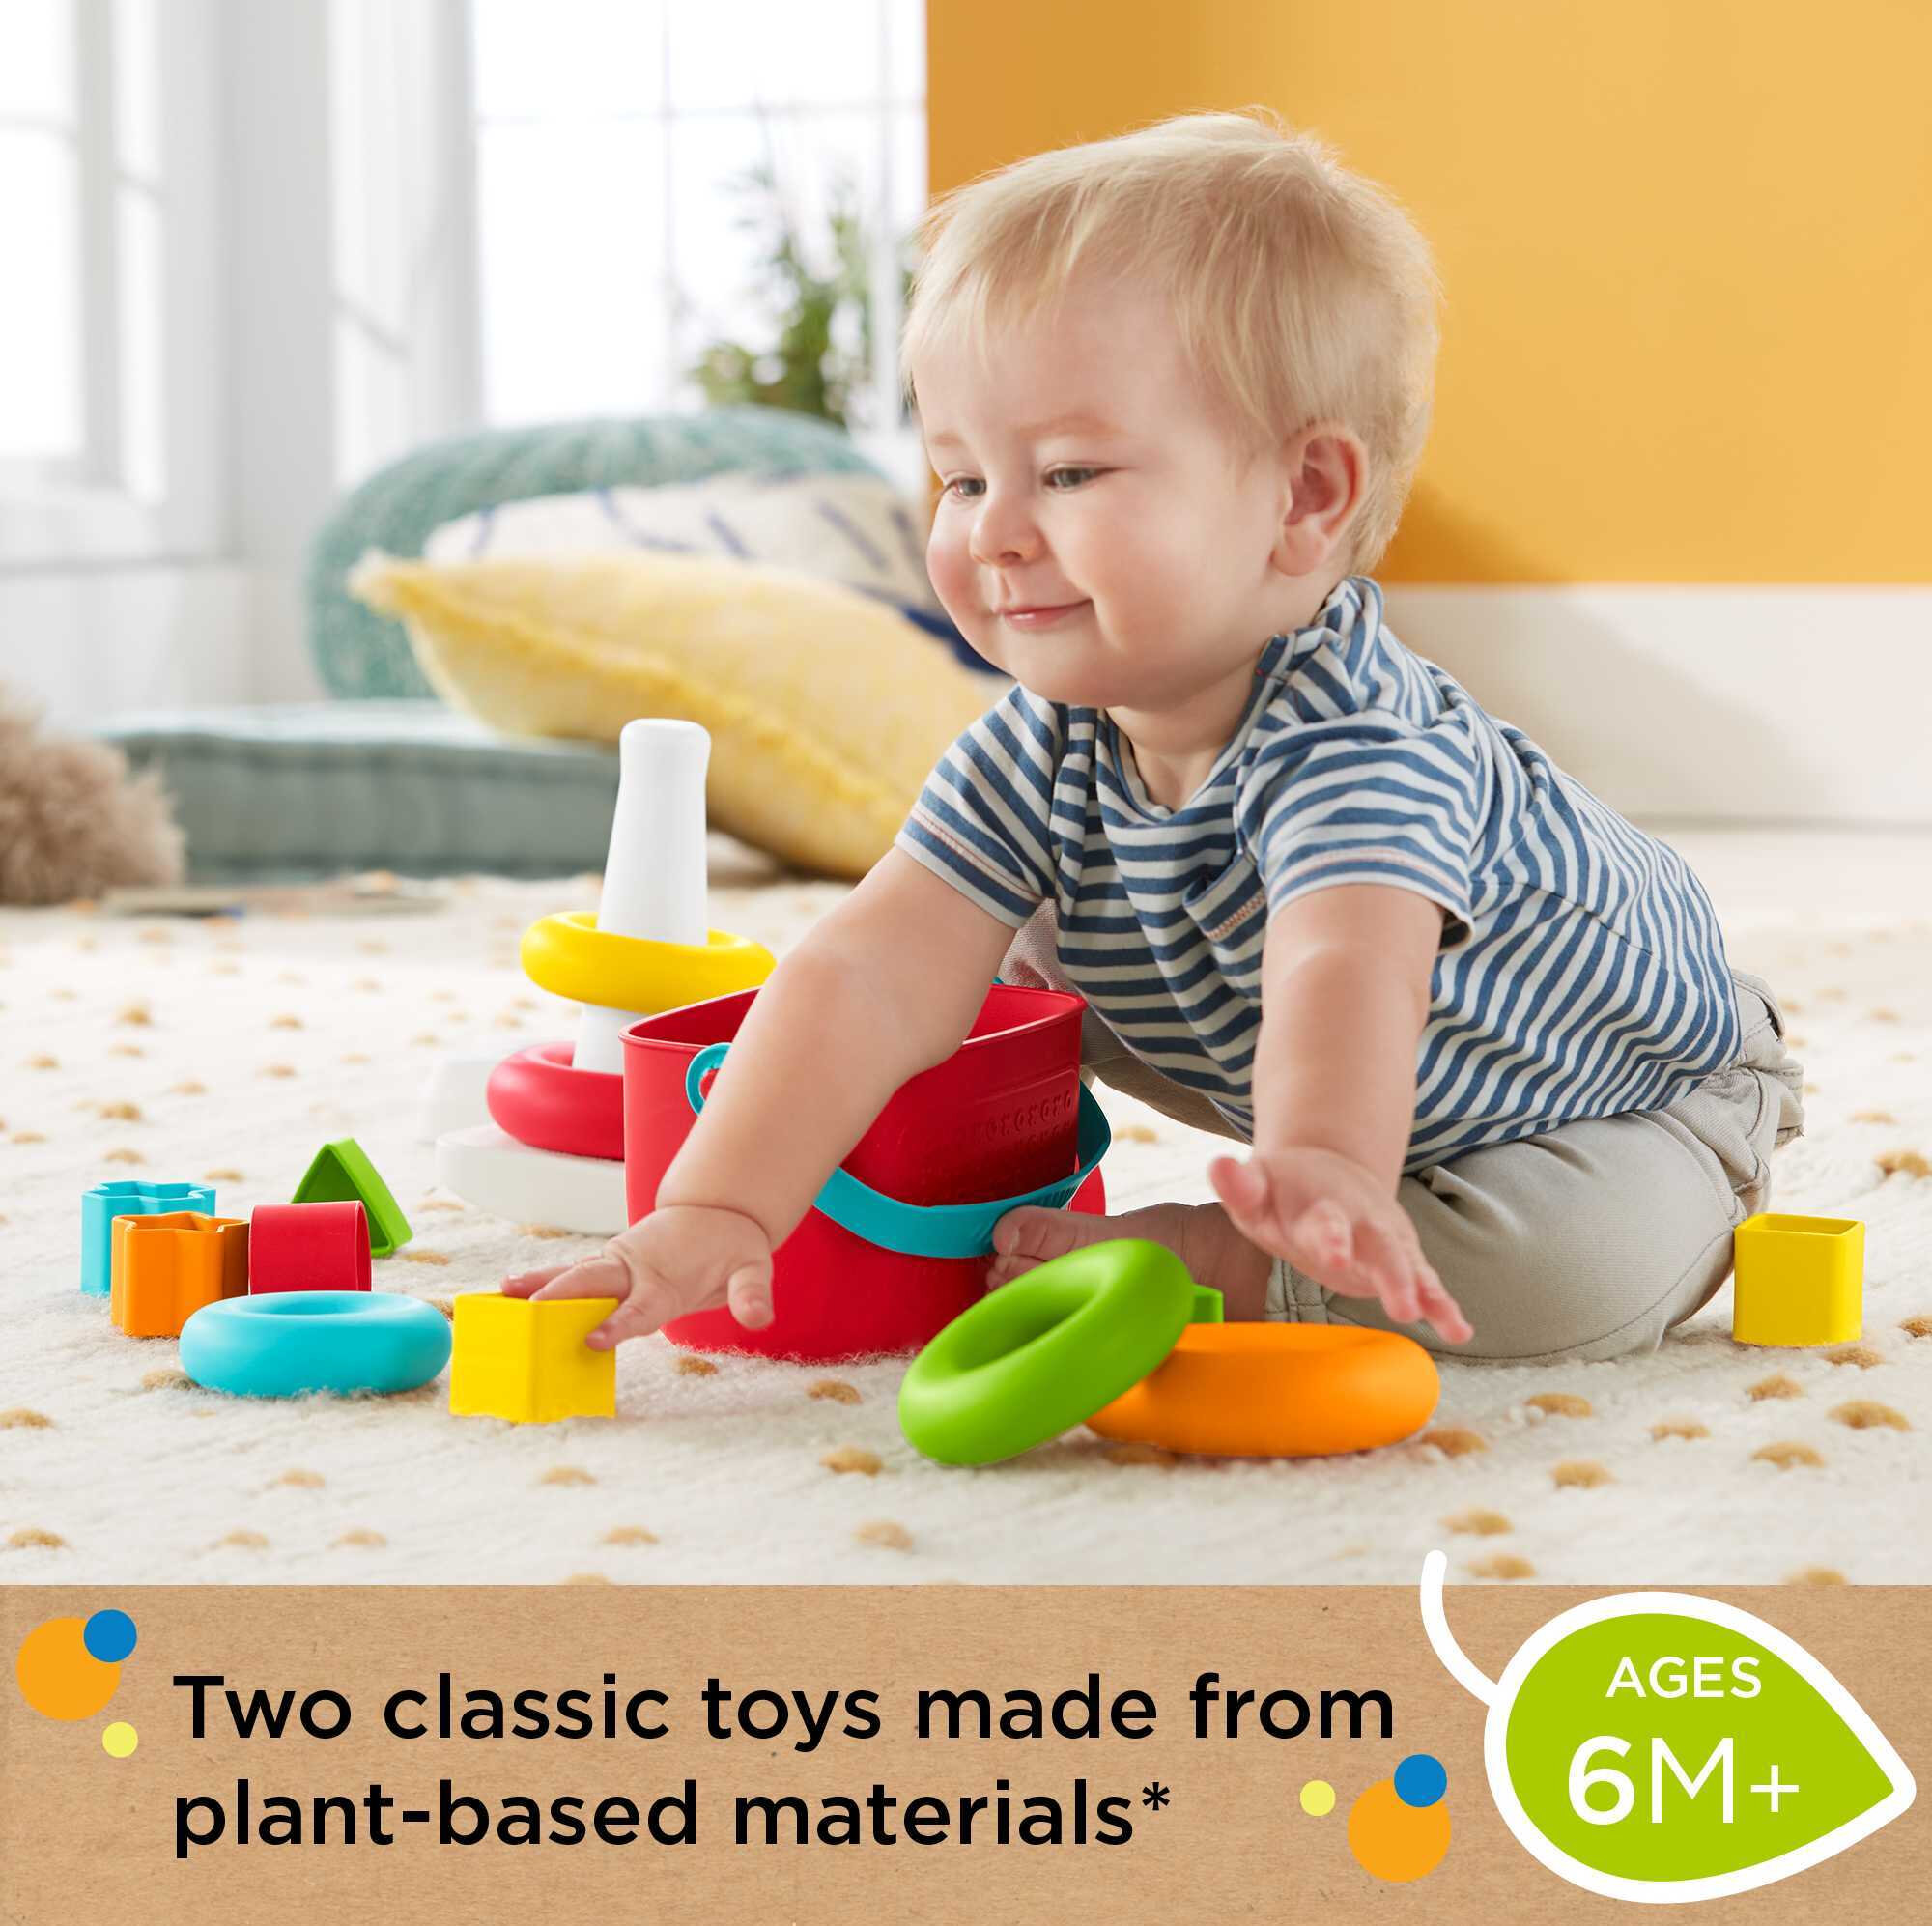 Fisher-Price Baby’s First Blocks & Rock-a-Stack Infant Toy Gift Set Made From Plant-Based Materials - image 2 of 6